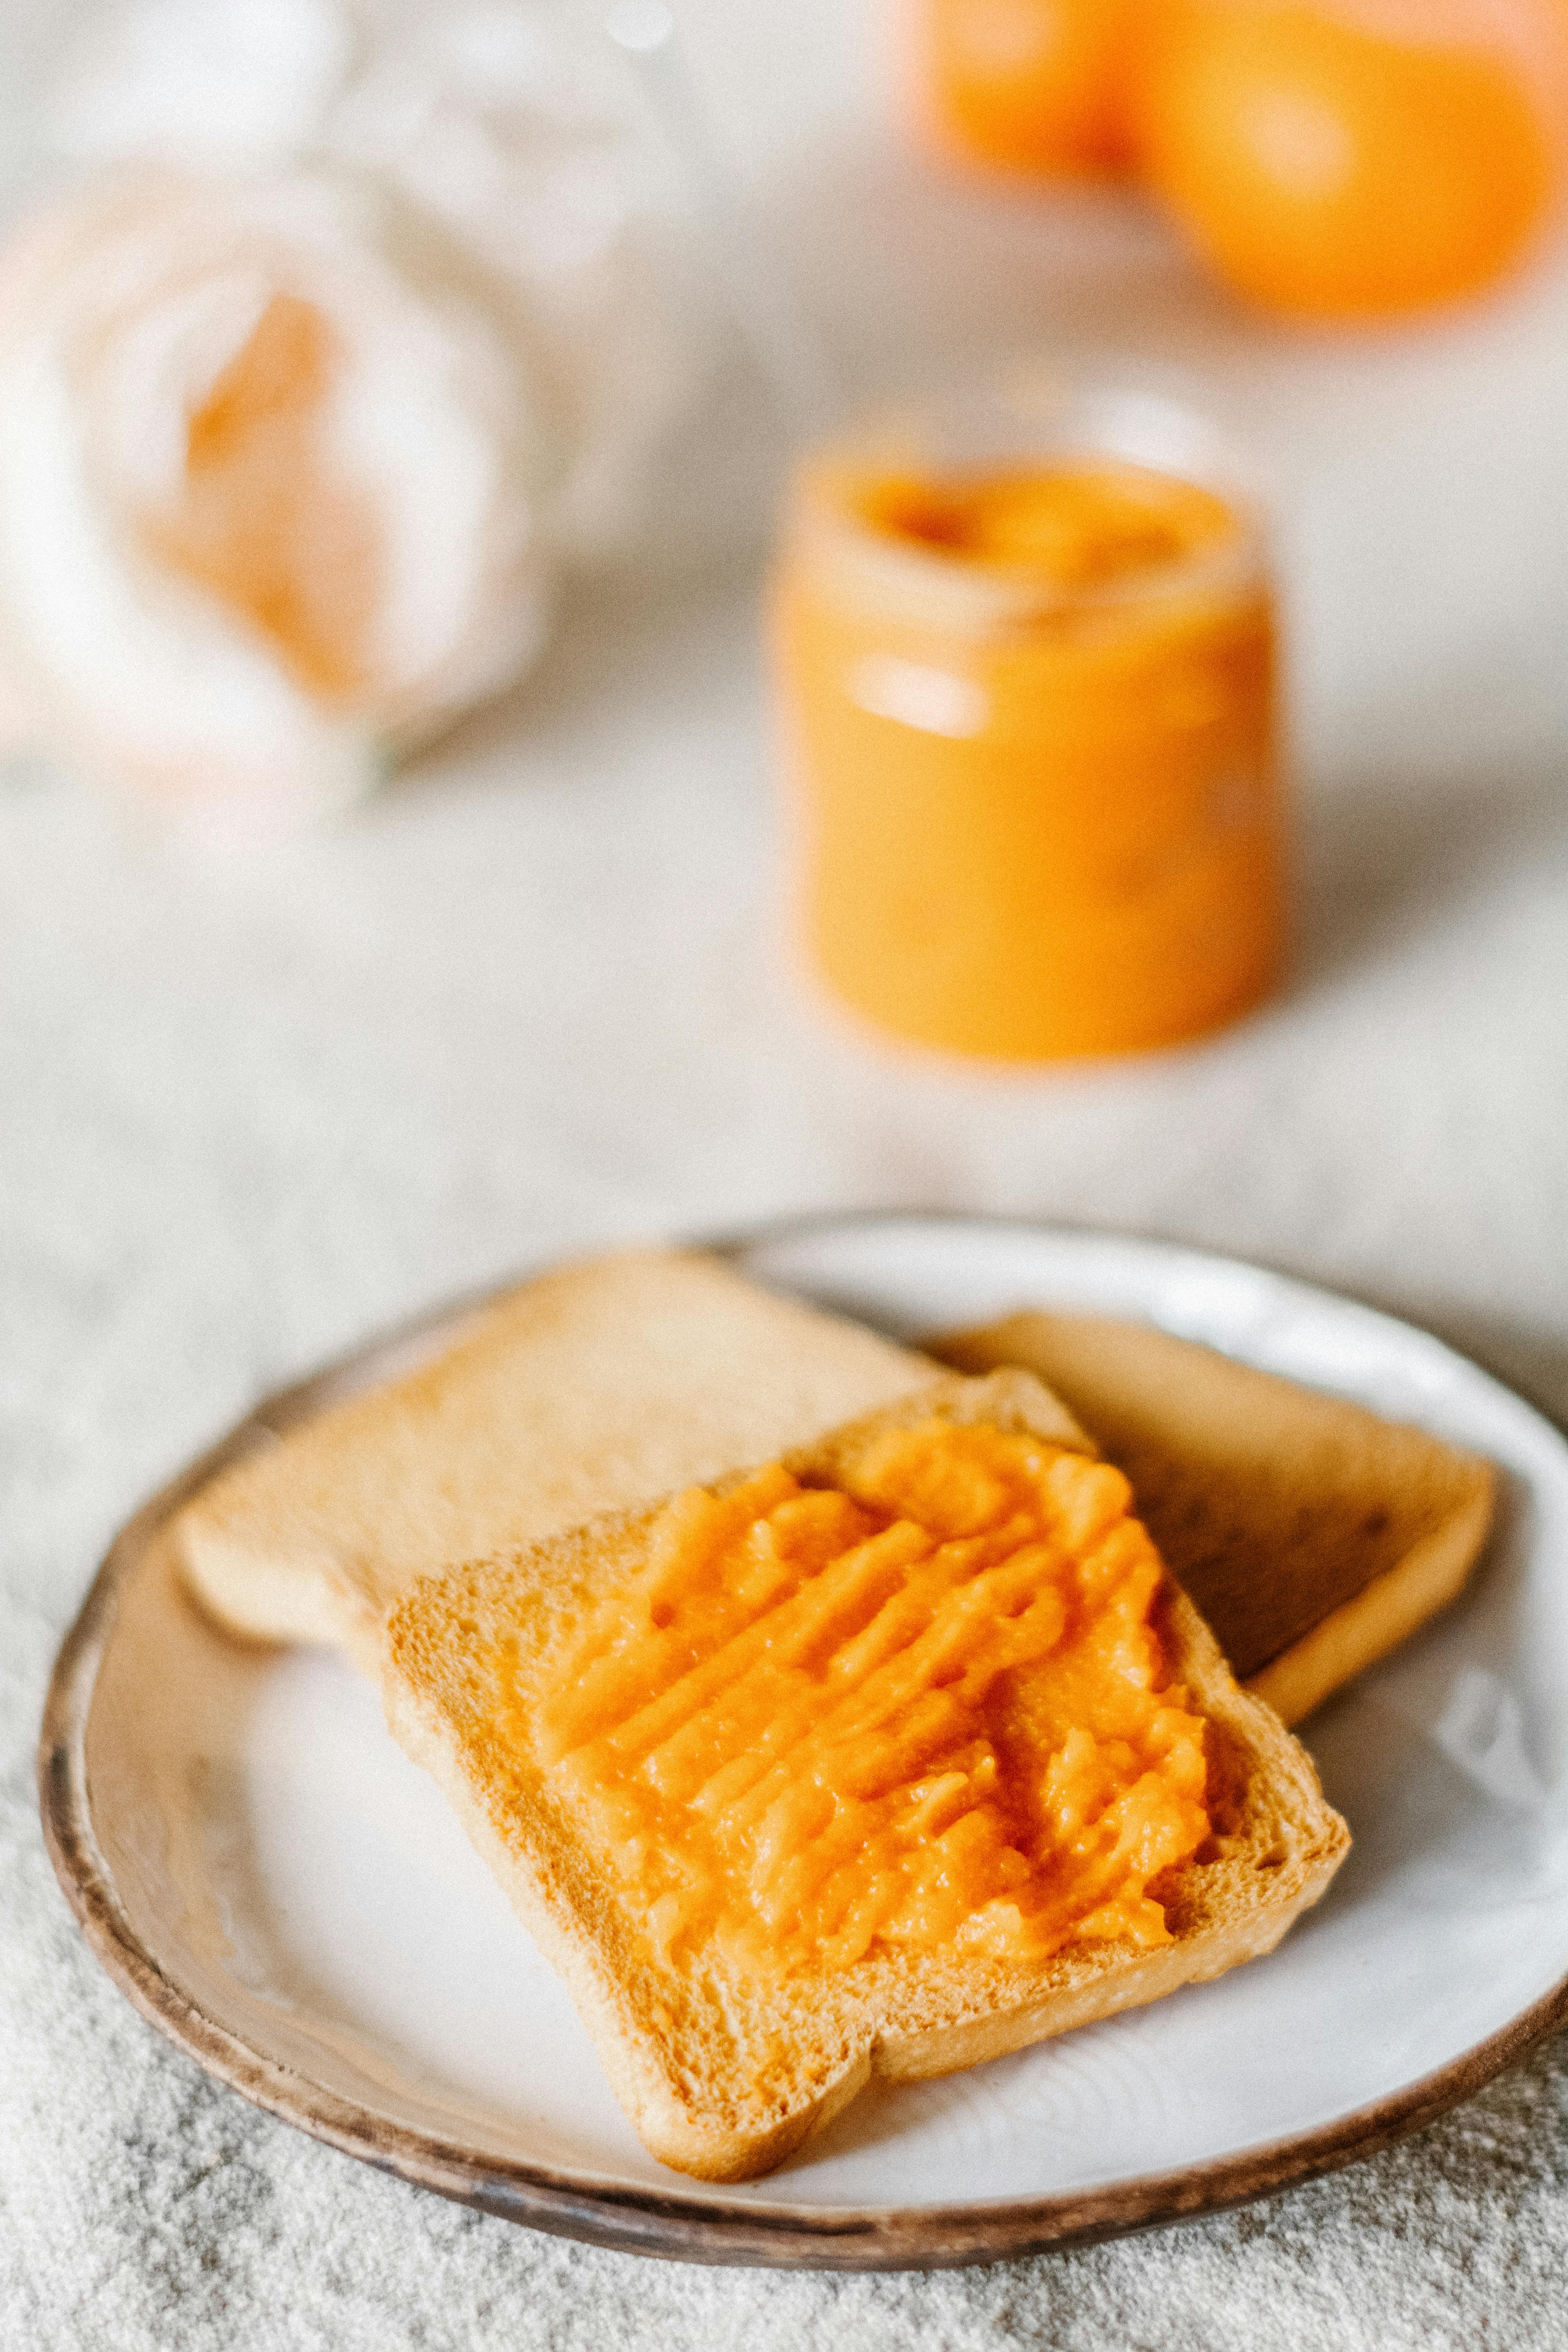 photo of an orange jam on a piece of bread